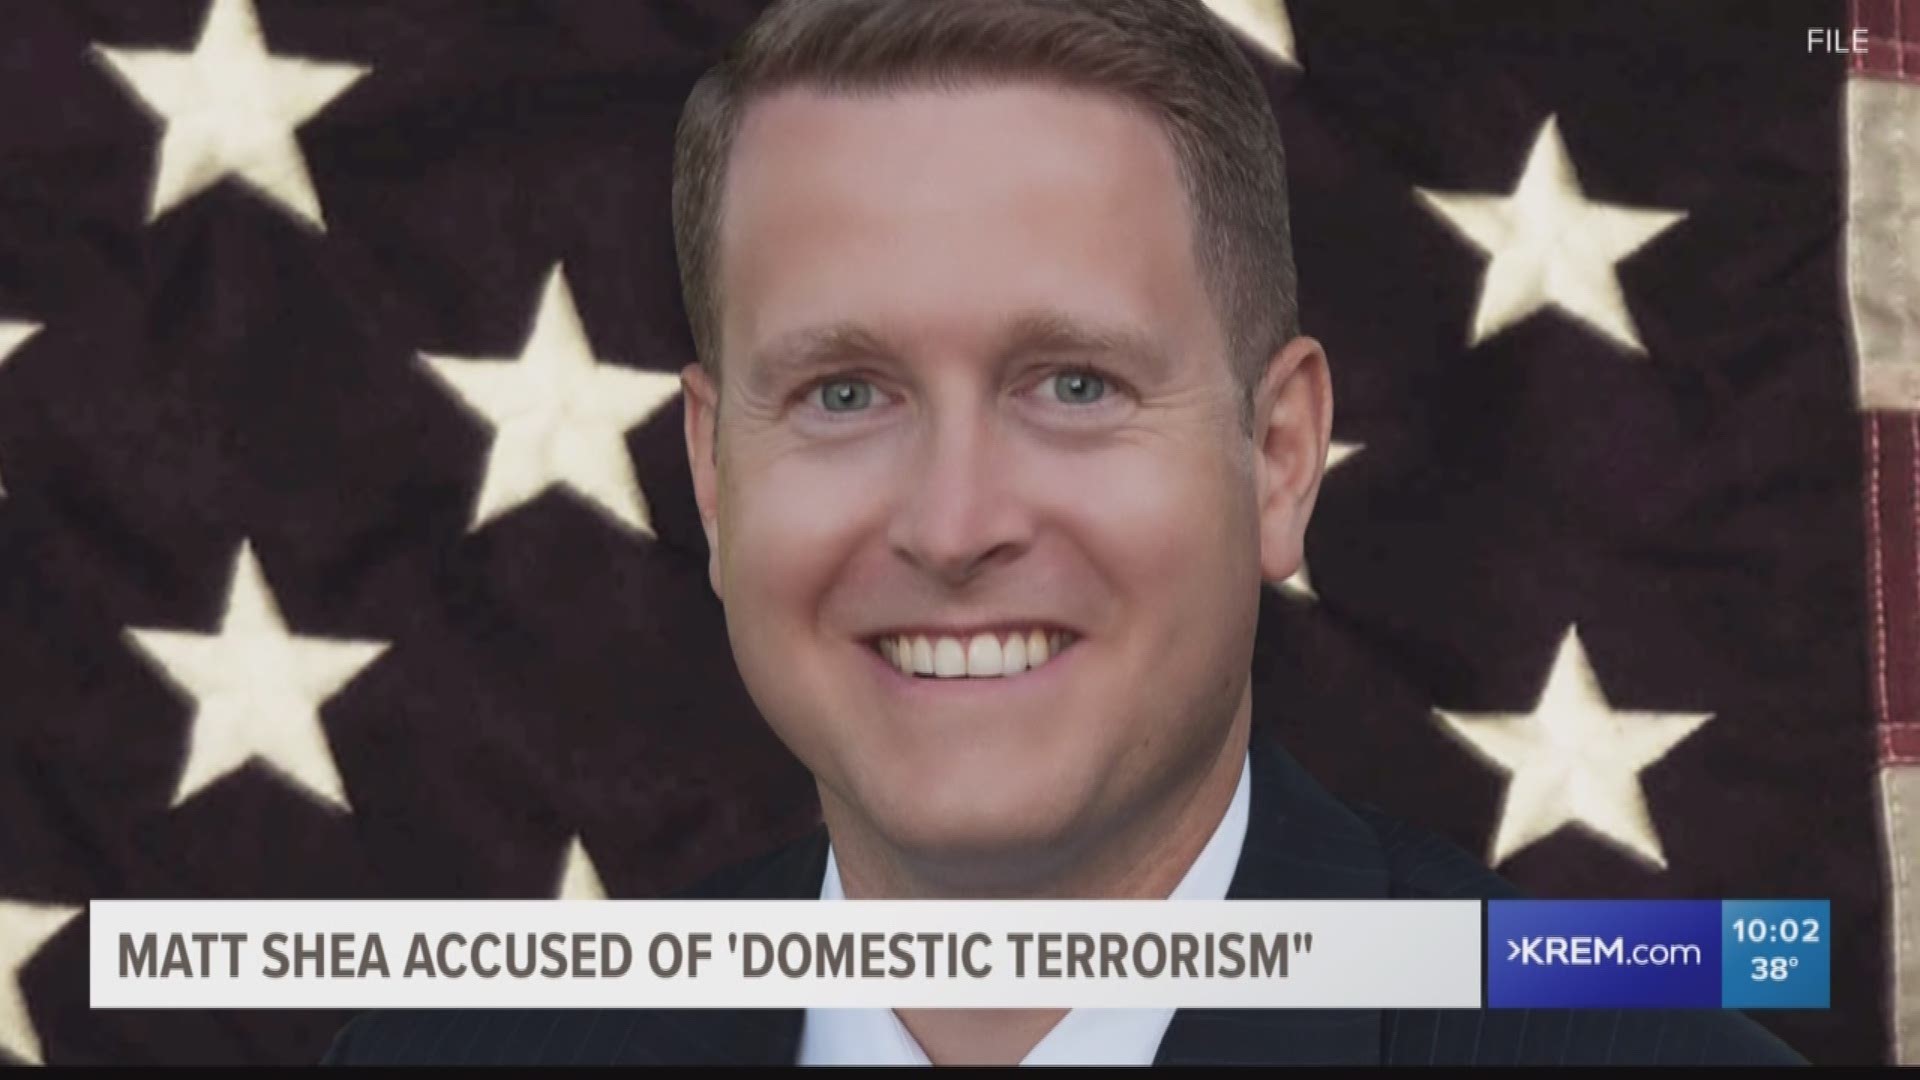 The investigation found that Shea “participated in an act of domestic terrorism against the United States” by helping plan an armed takeover.